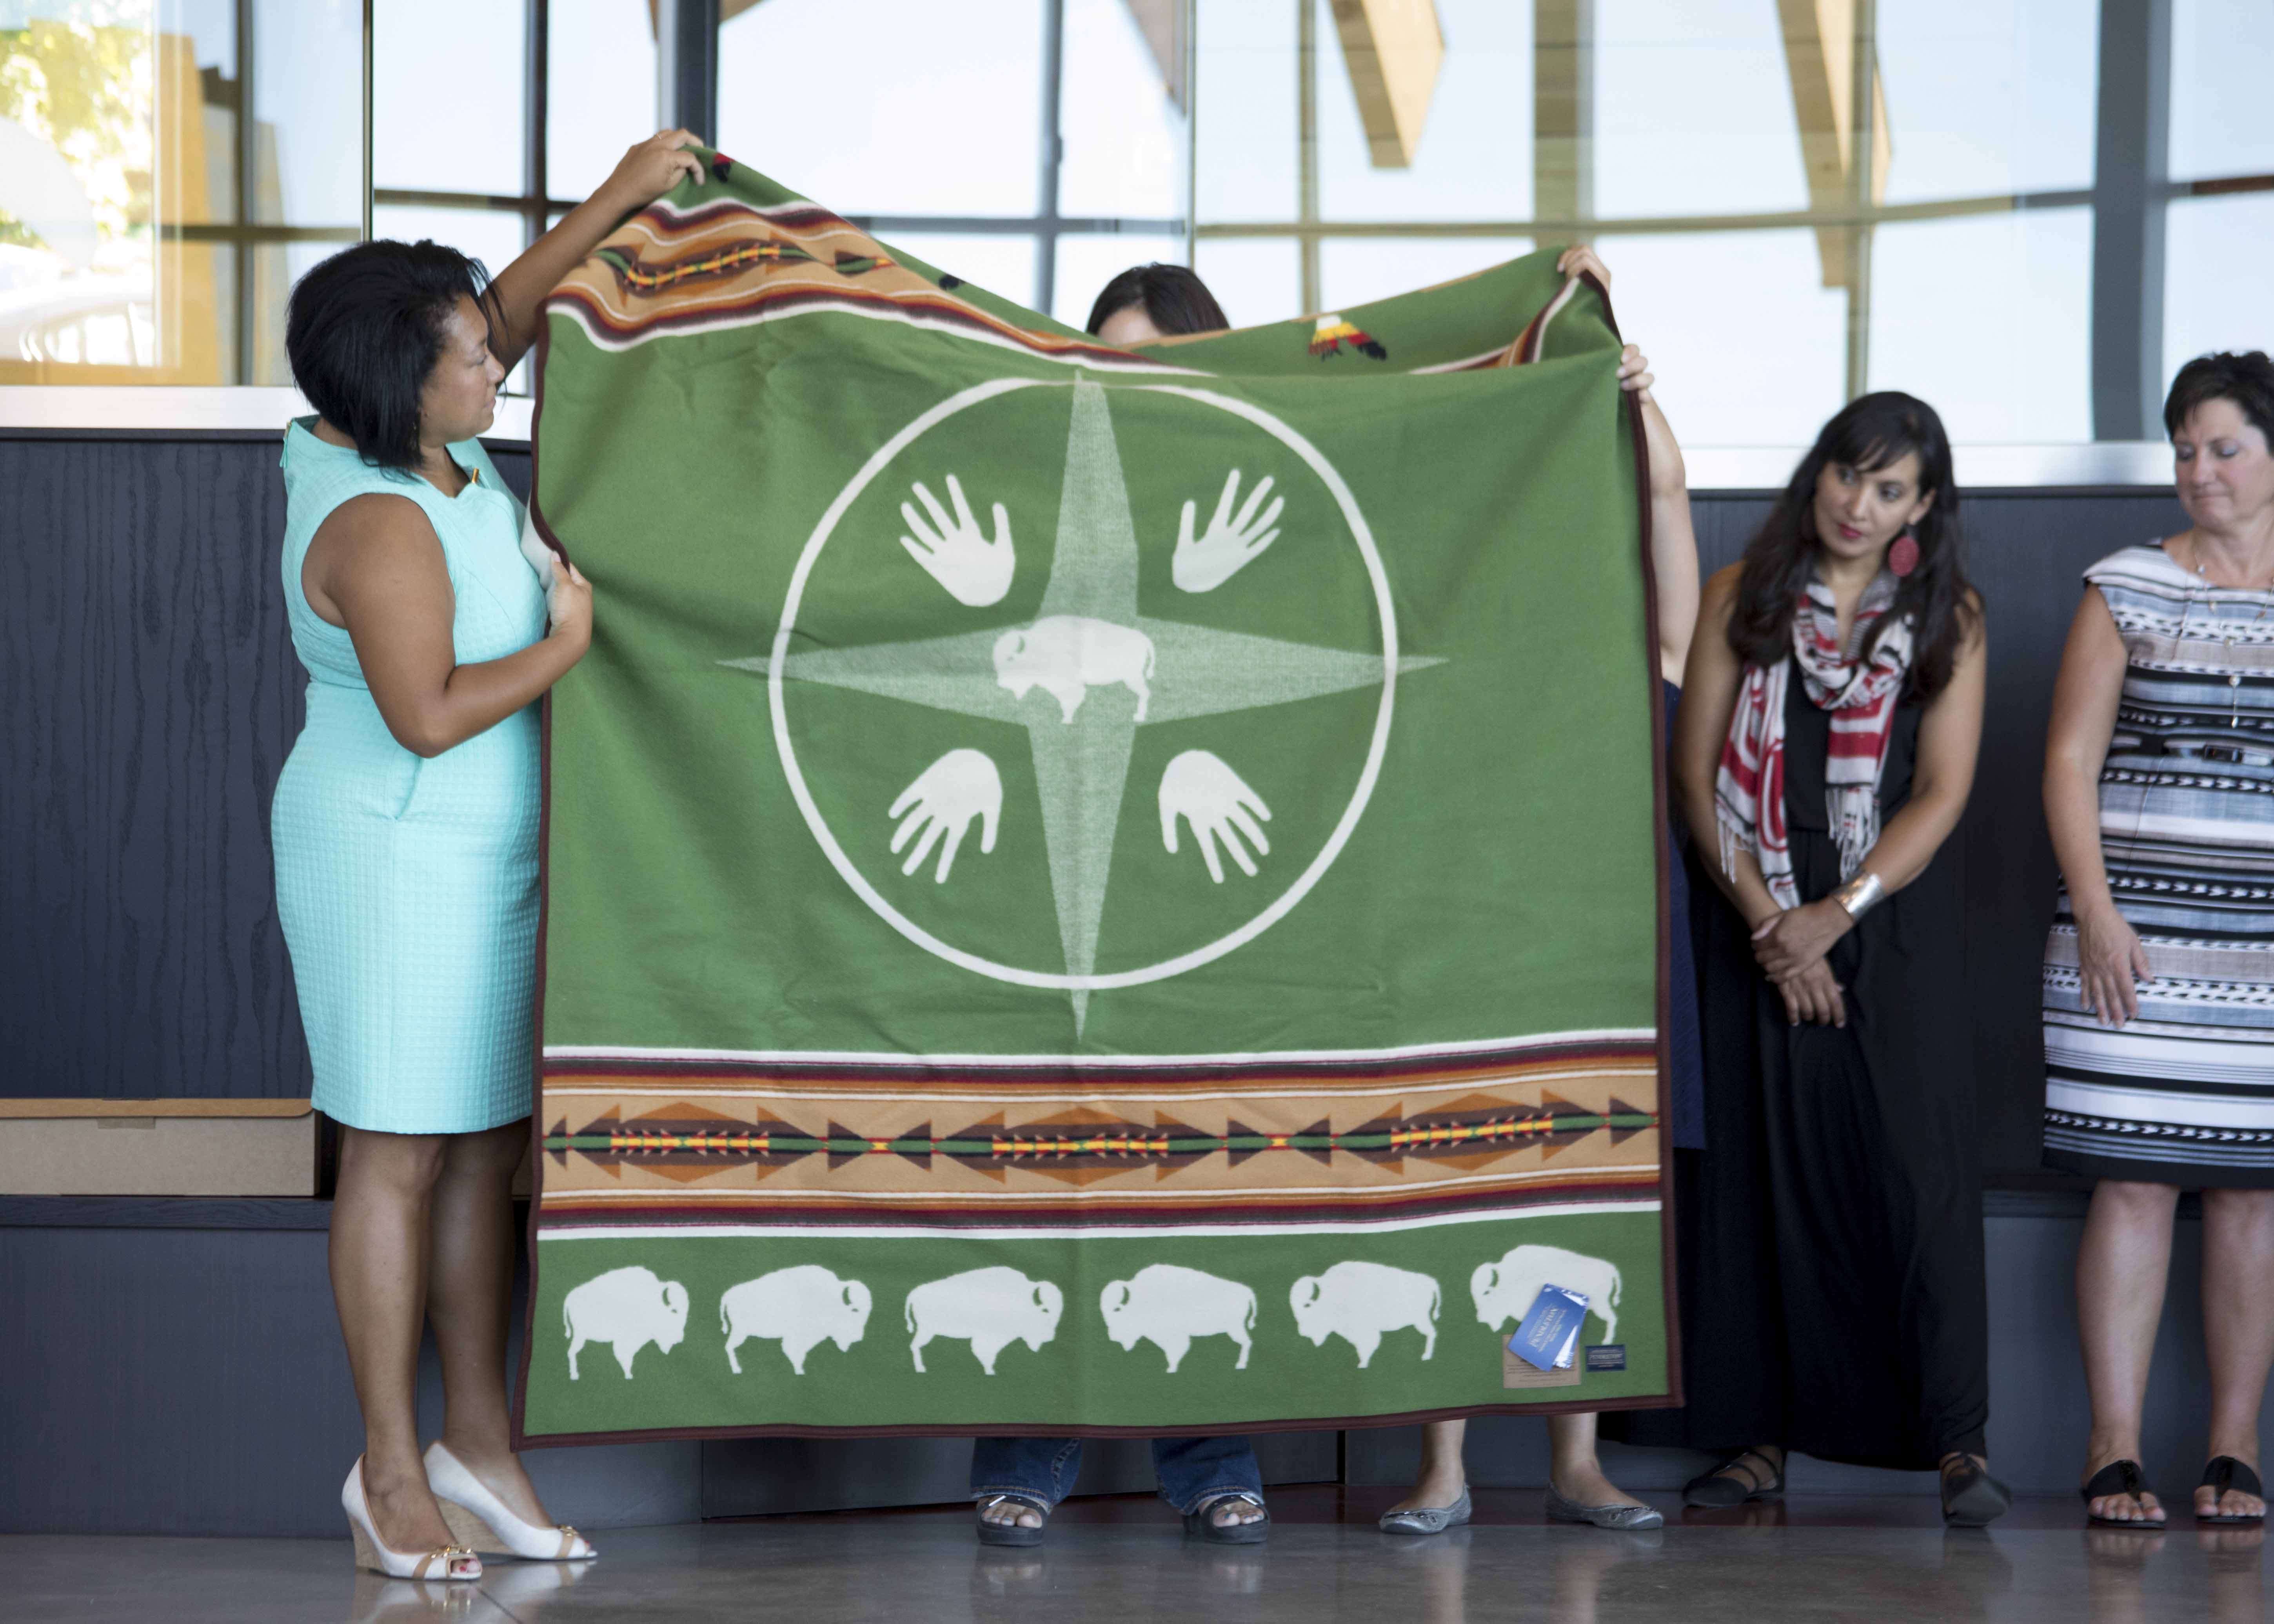 Paula Groves-Price holding a green Pendleton blanket with bison motif.